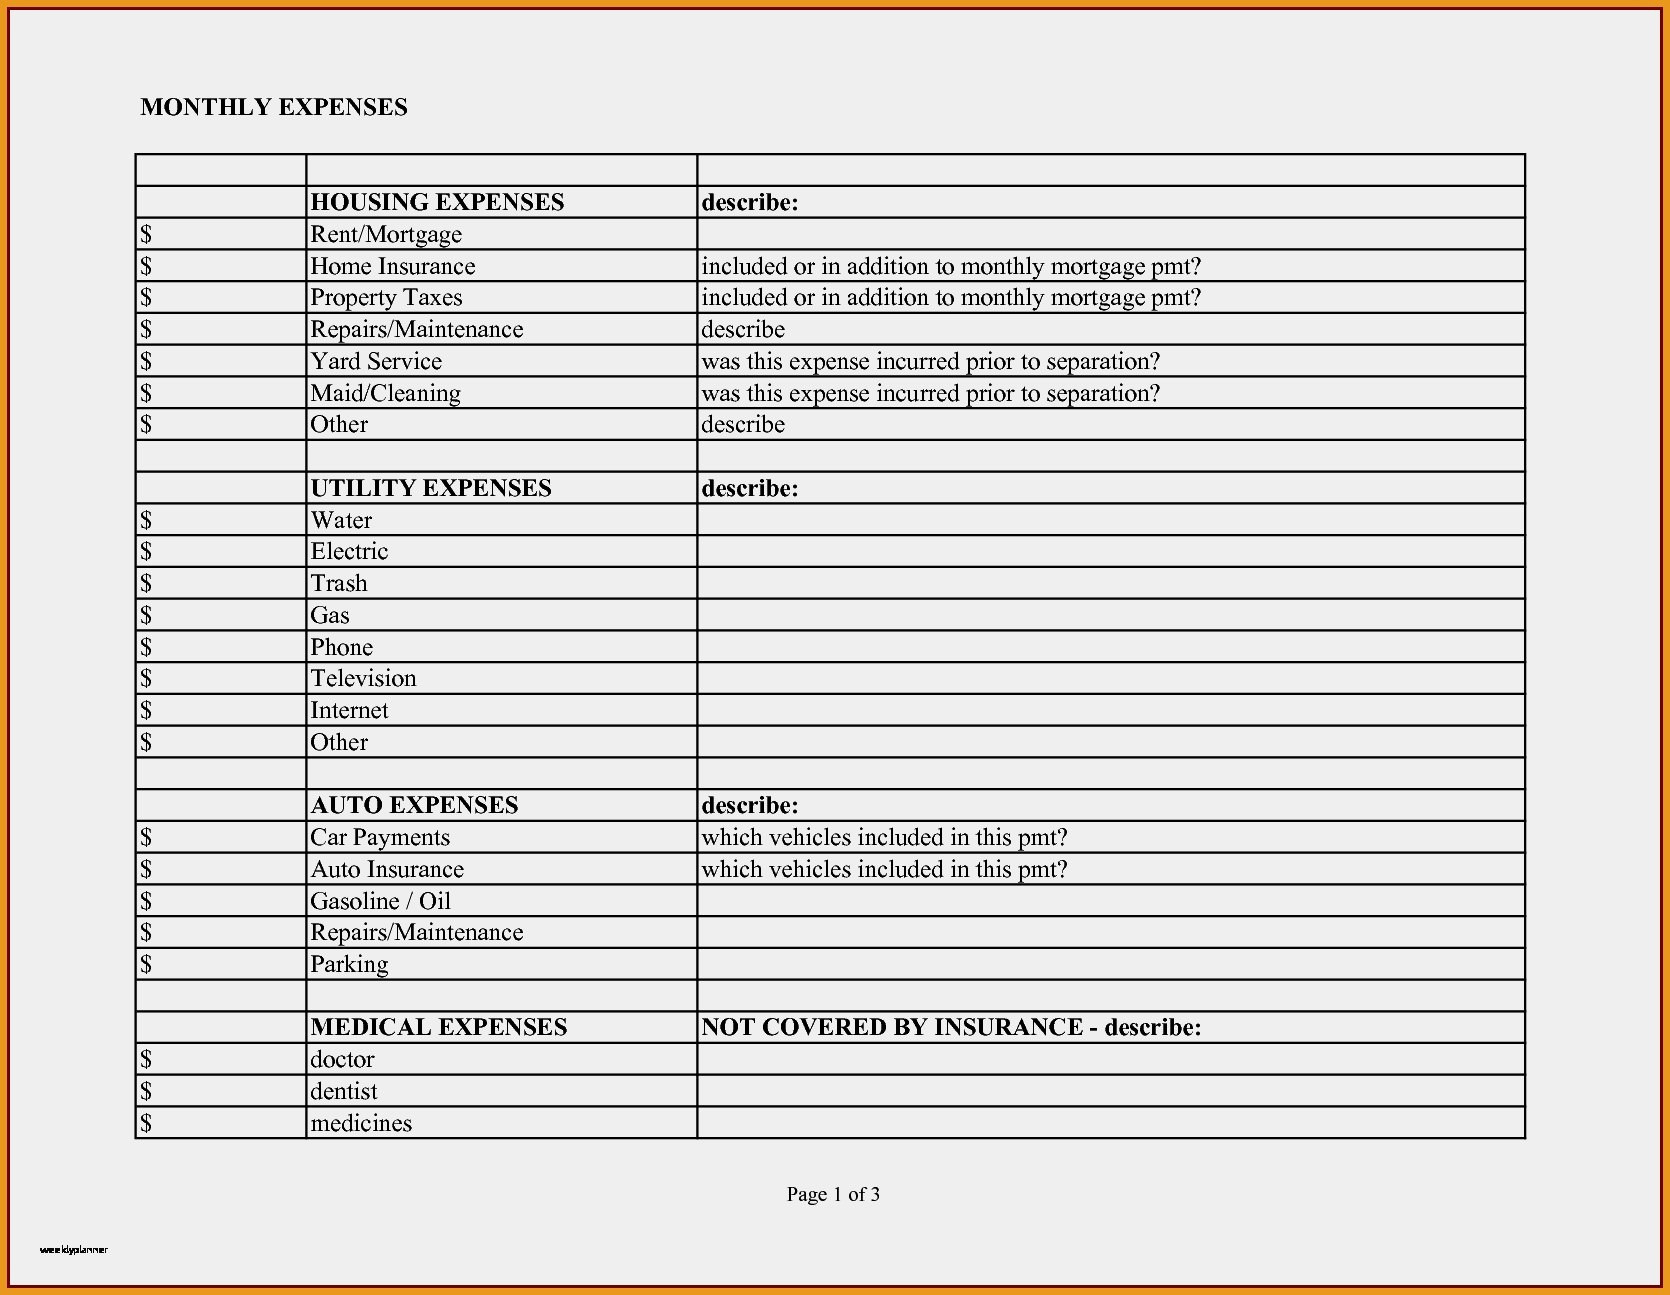 Business Expense Spreadsheet For Taxes Rental Property Tax With Business Expense Deductions Spreadsheet